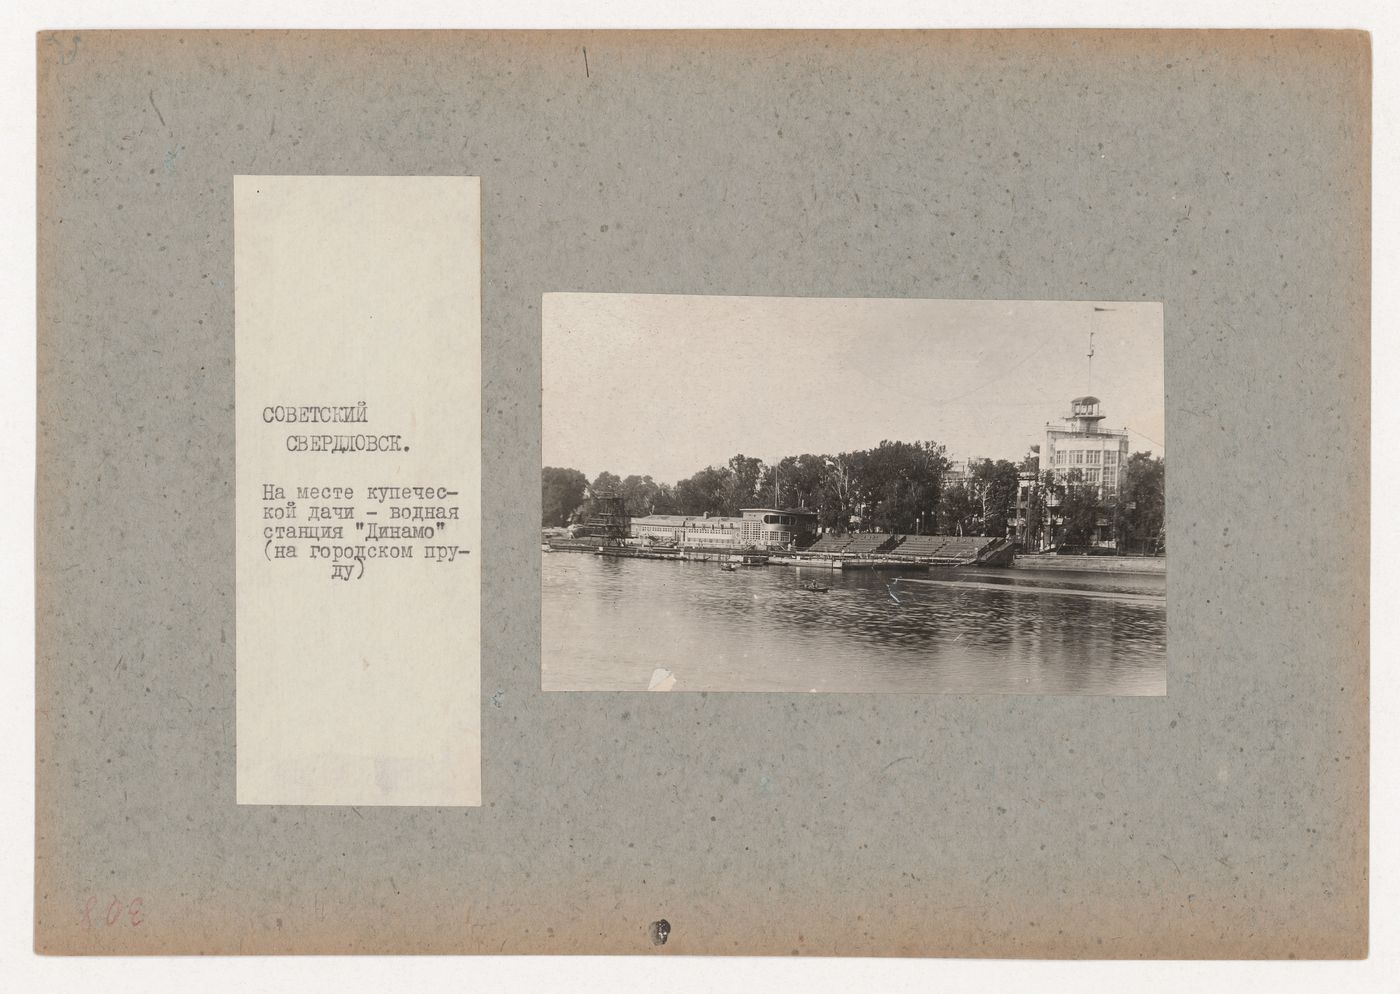 View of the Dinamo water sports station from across the pond, Sverdlovsk, Soviet Union (now Ekaterinburg, Russia)